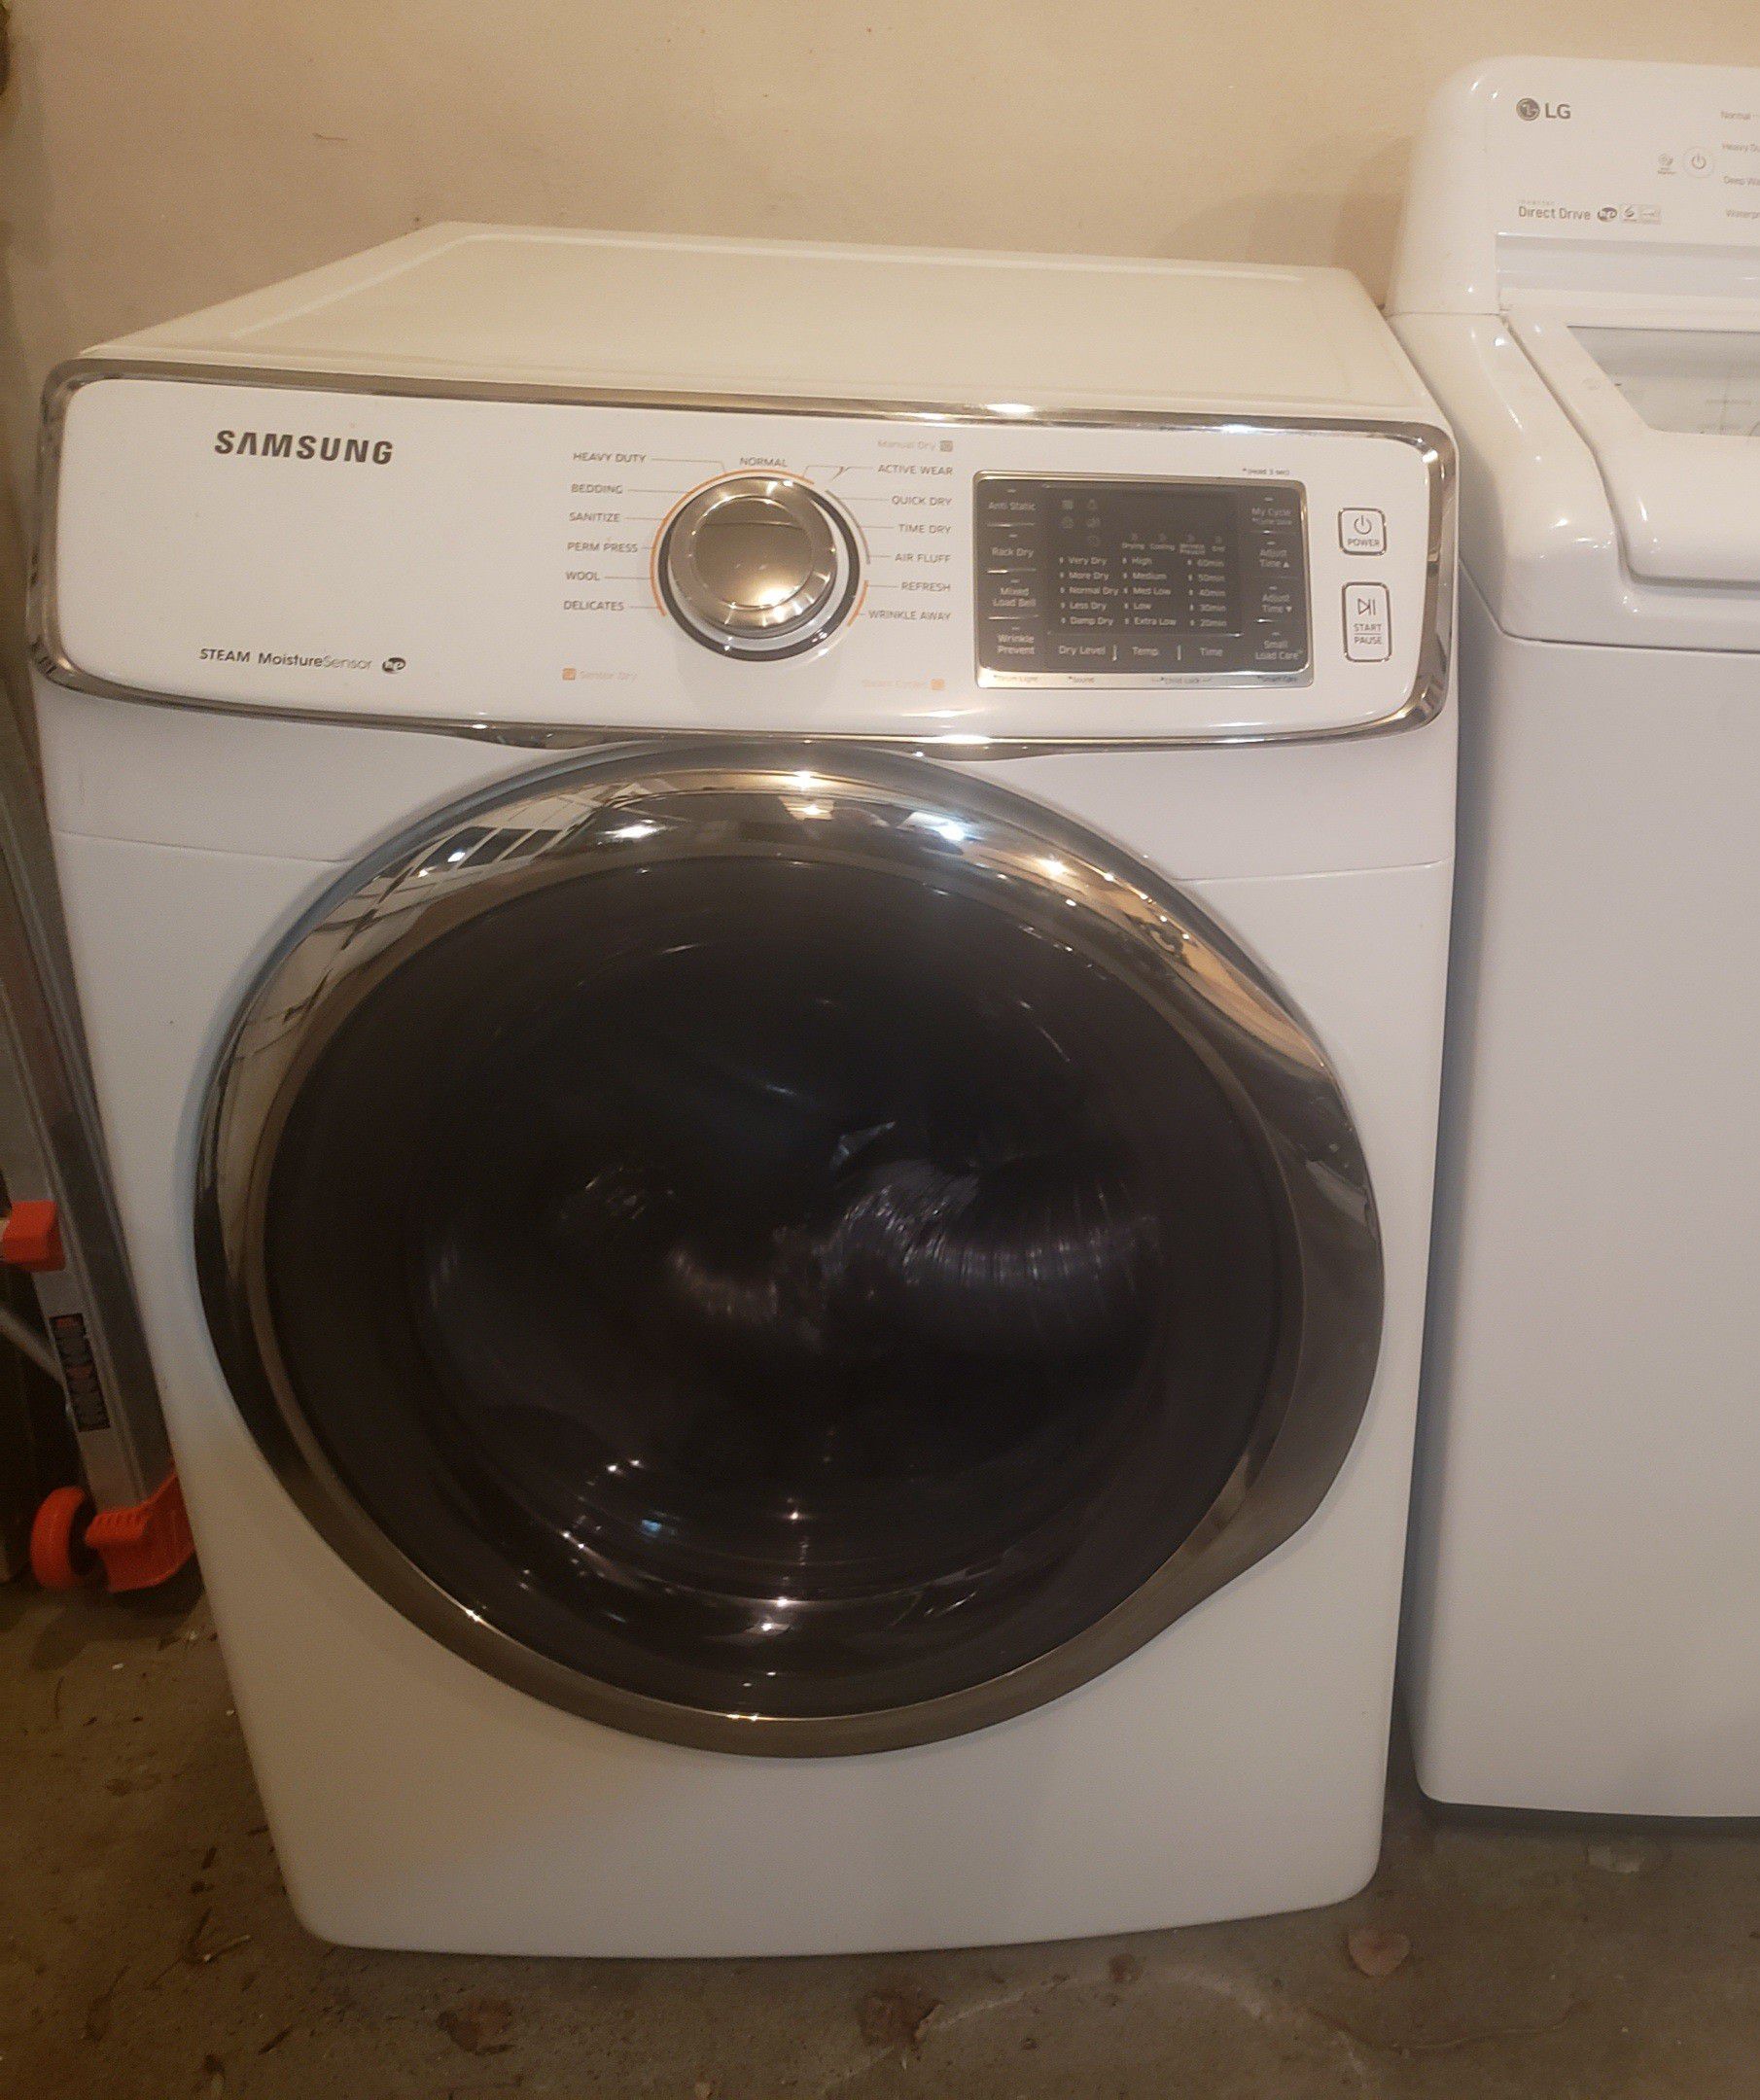 Samsung GAS Dryer with 7.5 cu. ft. Capa